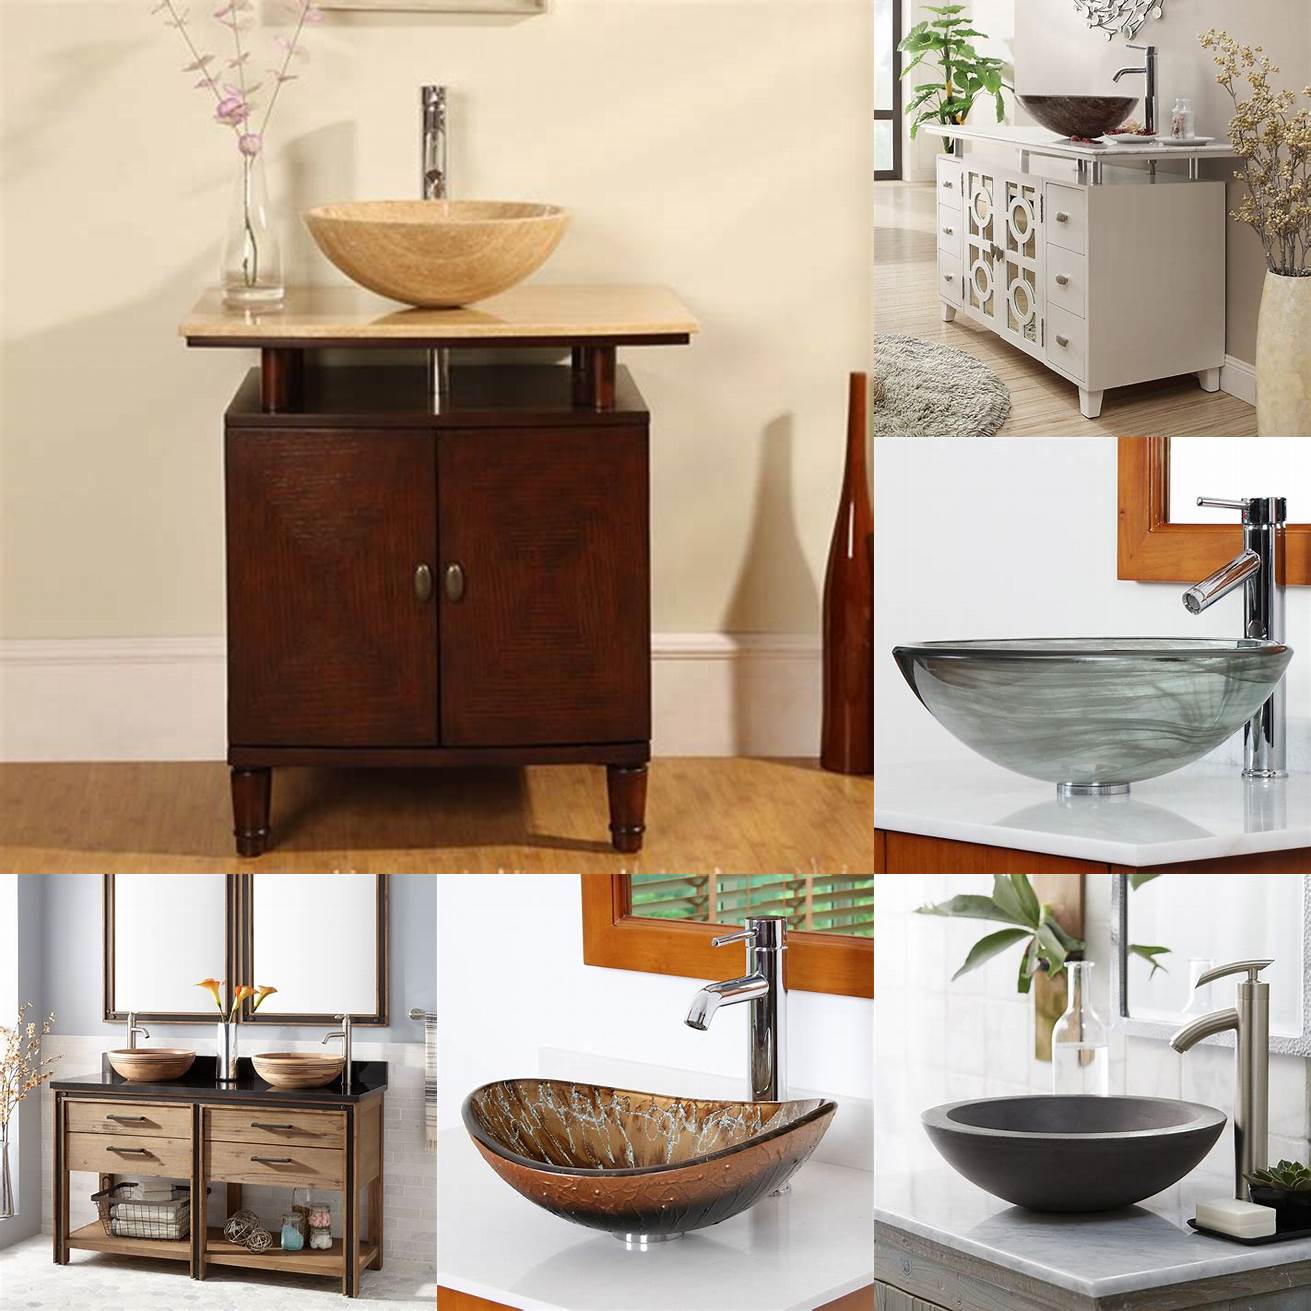 A vessel sink bathroom vanity is a unique and stylish addition to your bathroom